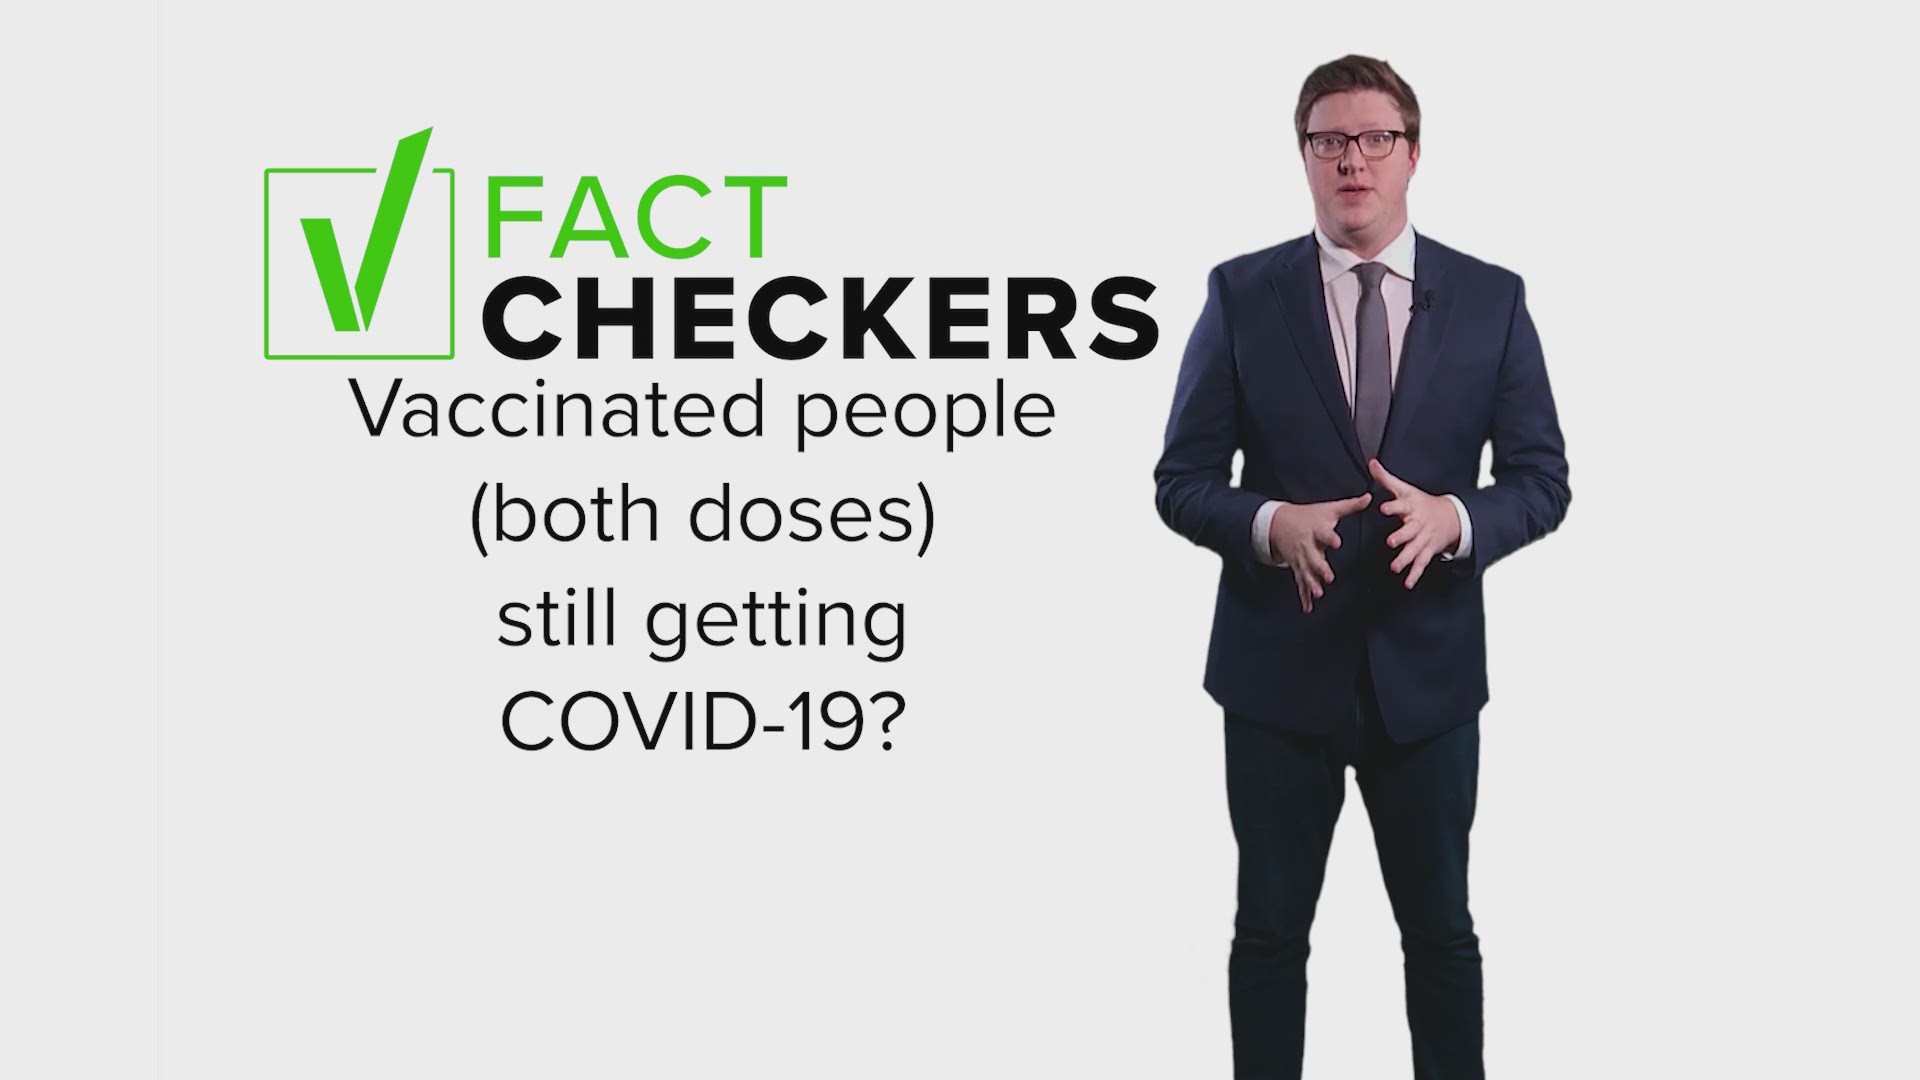 A vaccine with a 95% efficacy rate still has rare cases where people contract the disease after getting a vaccination.